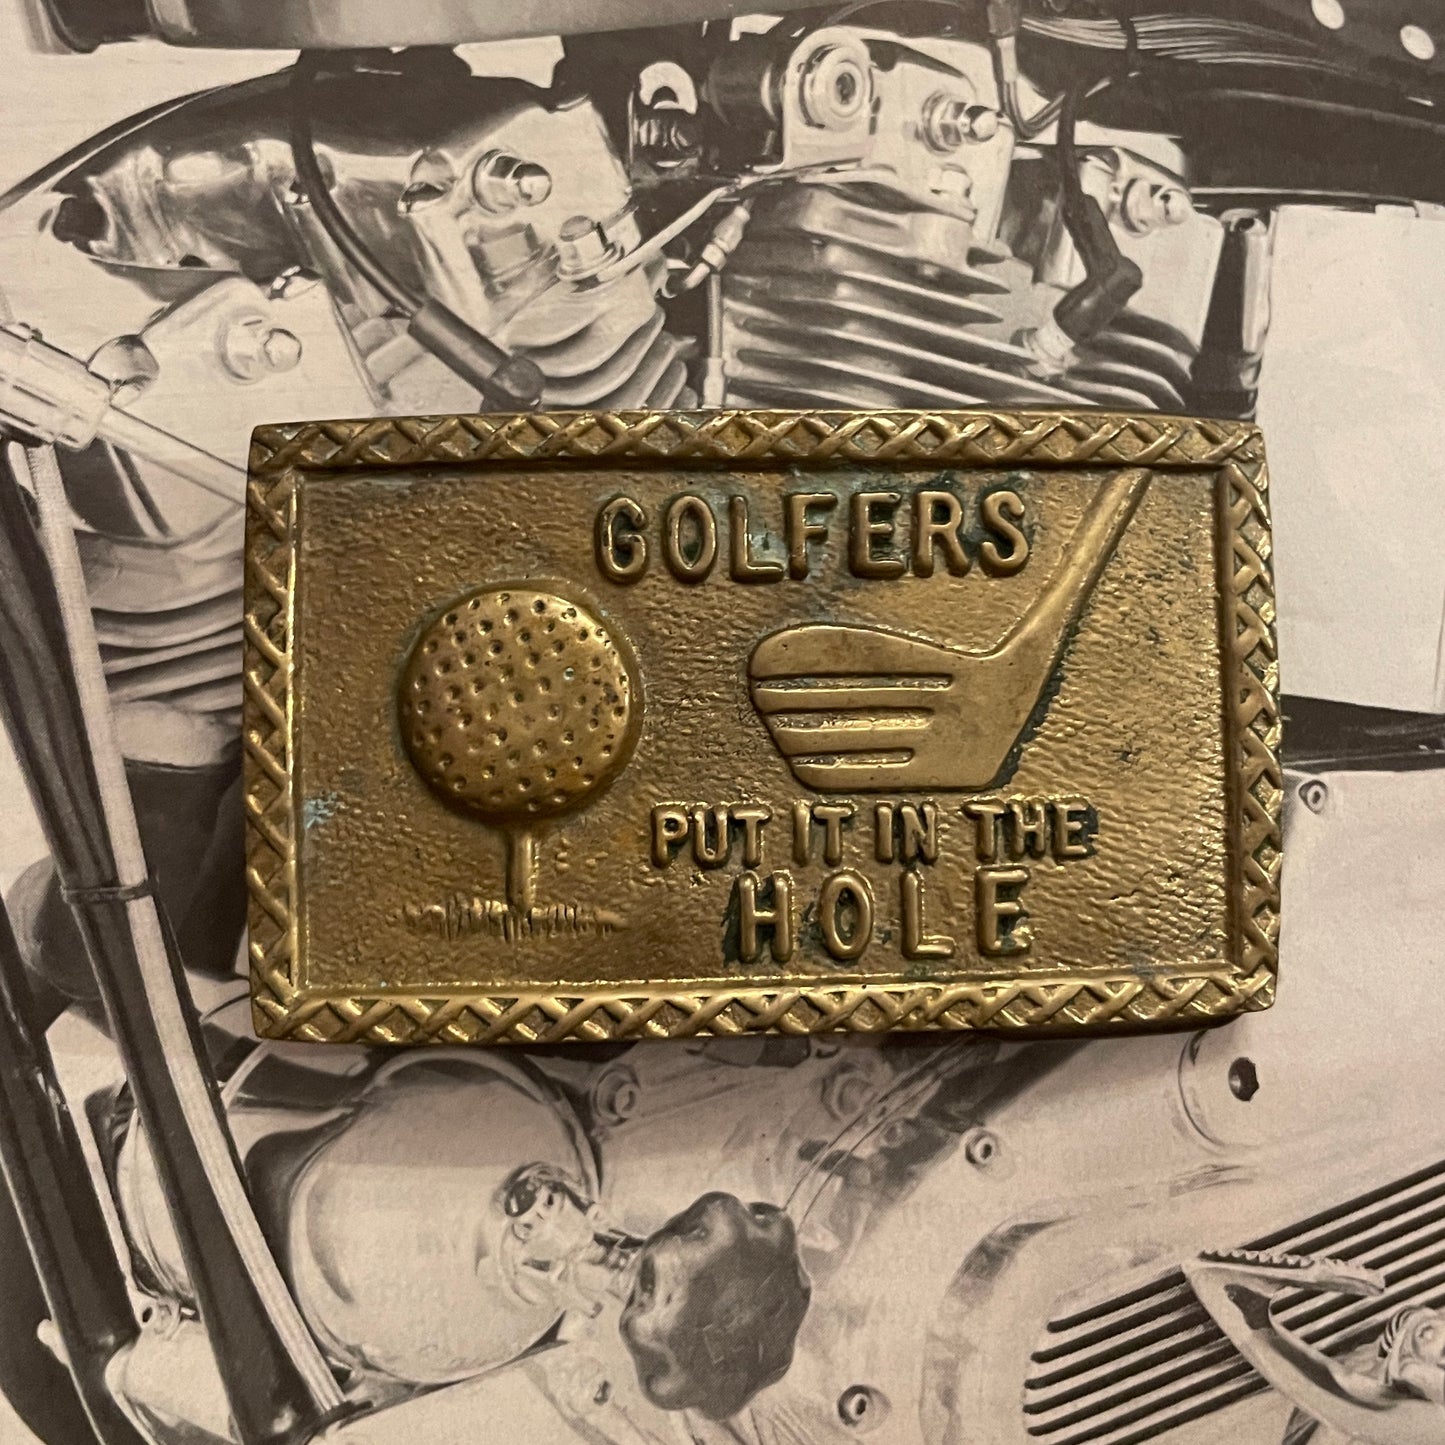 "Golfers Put It in the Hole" Buckle [1970s]